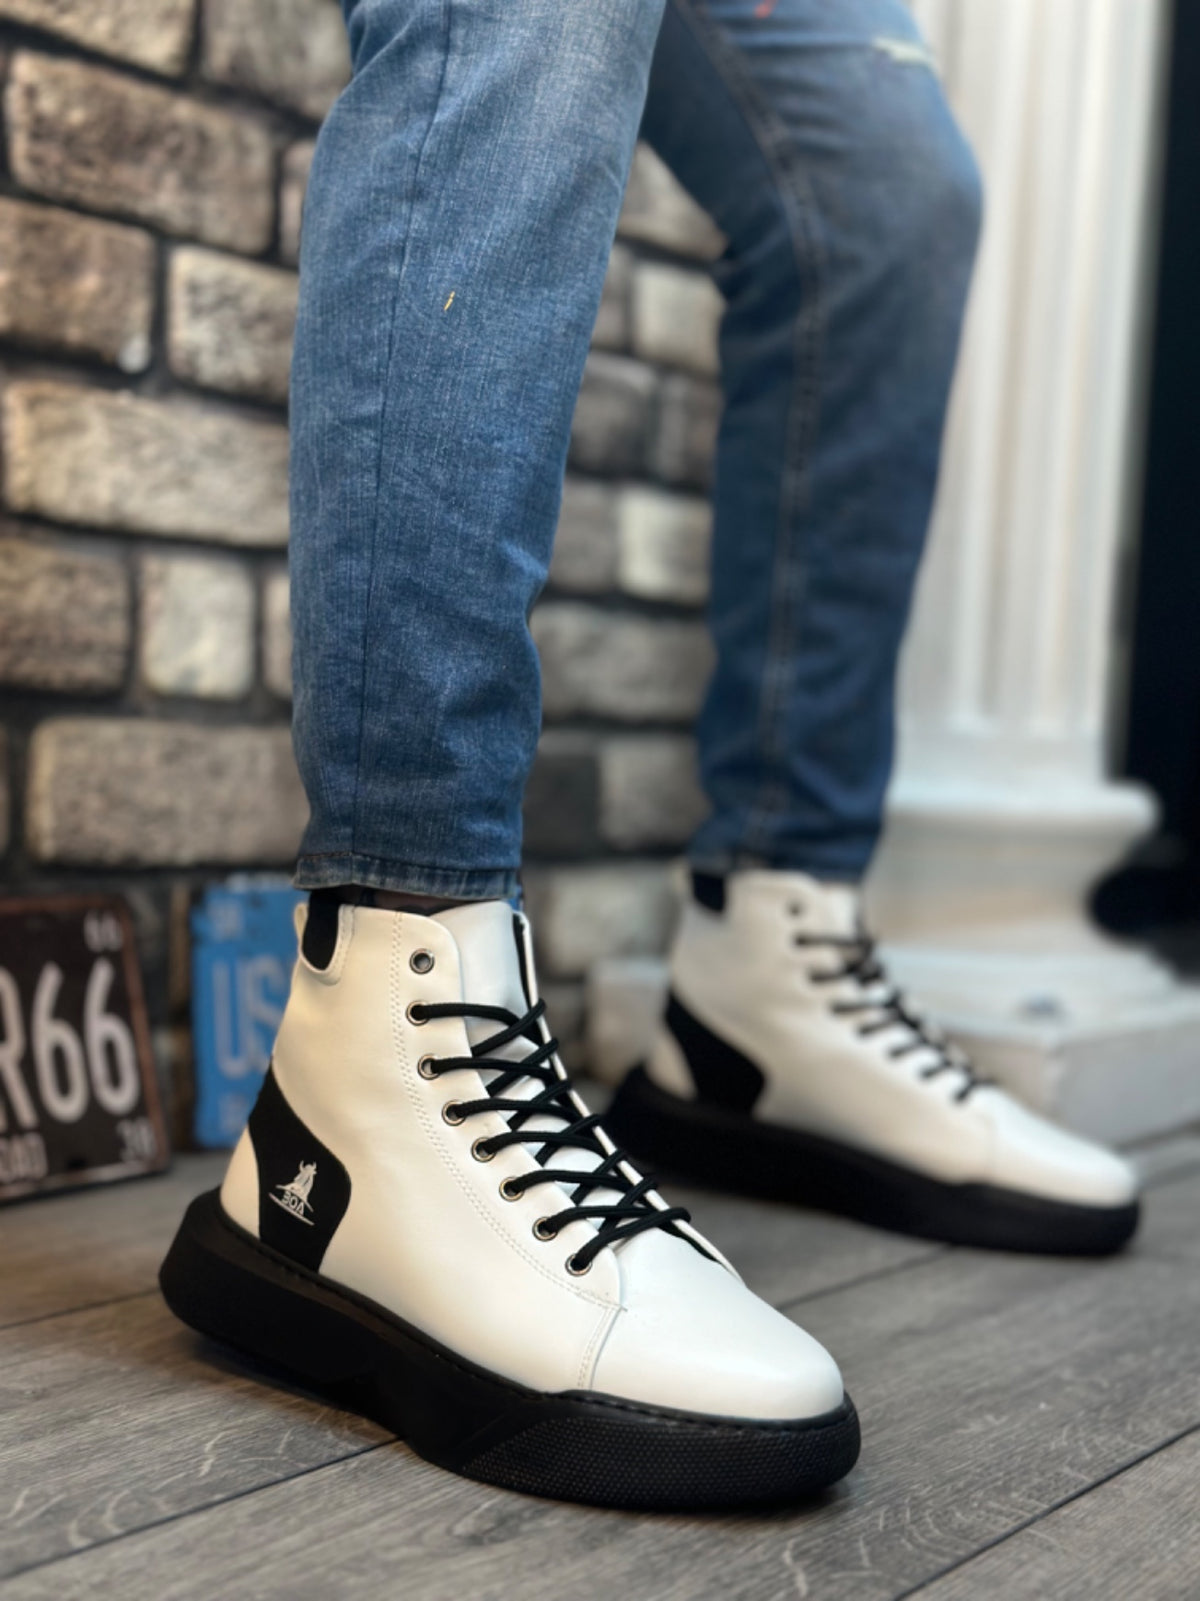 BA0155 Lace-Up Men's High Sole White Black Sole Sport Boots - STREETMODE ™